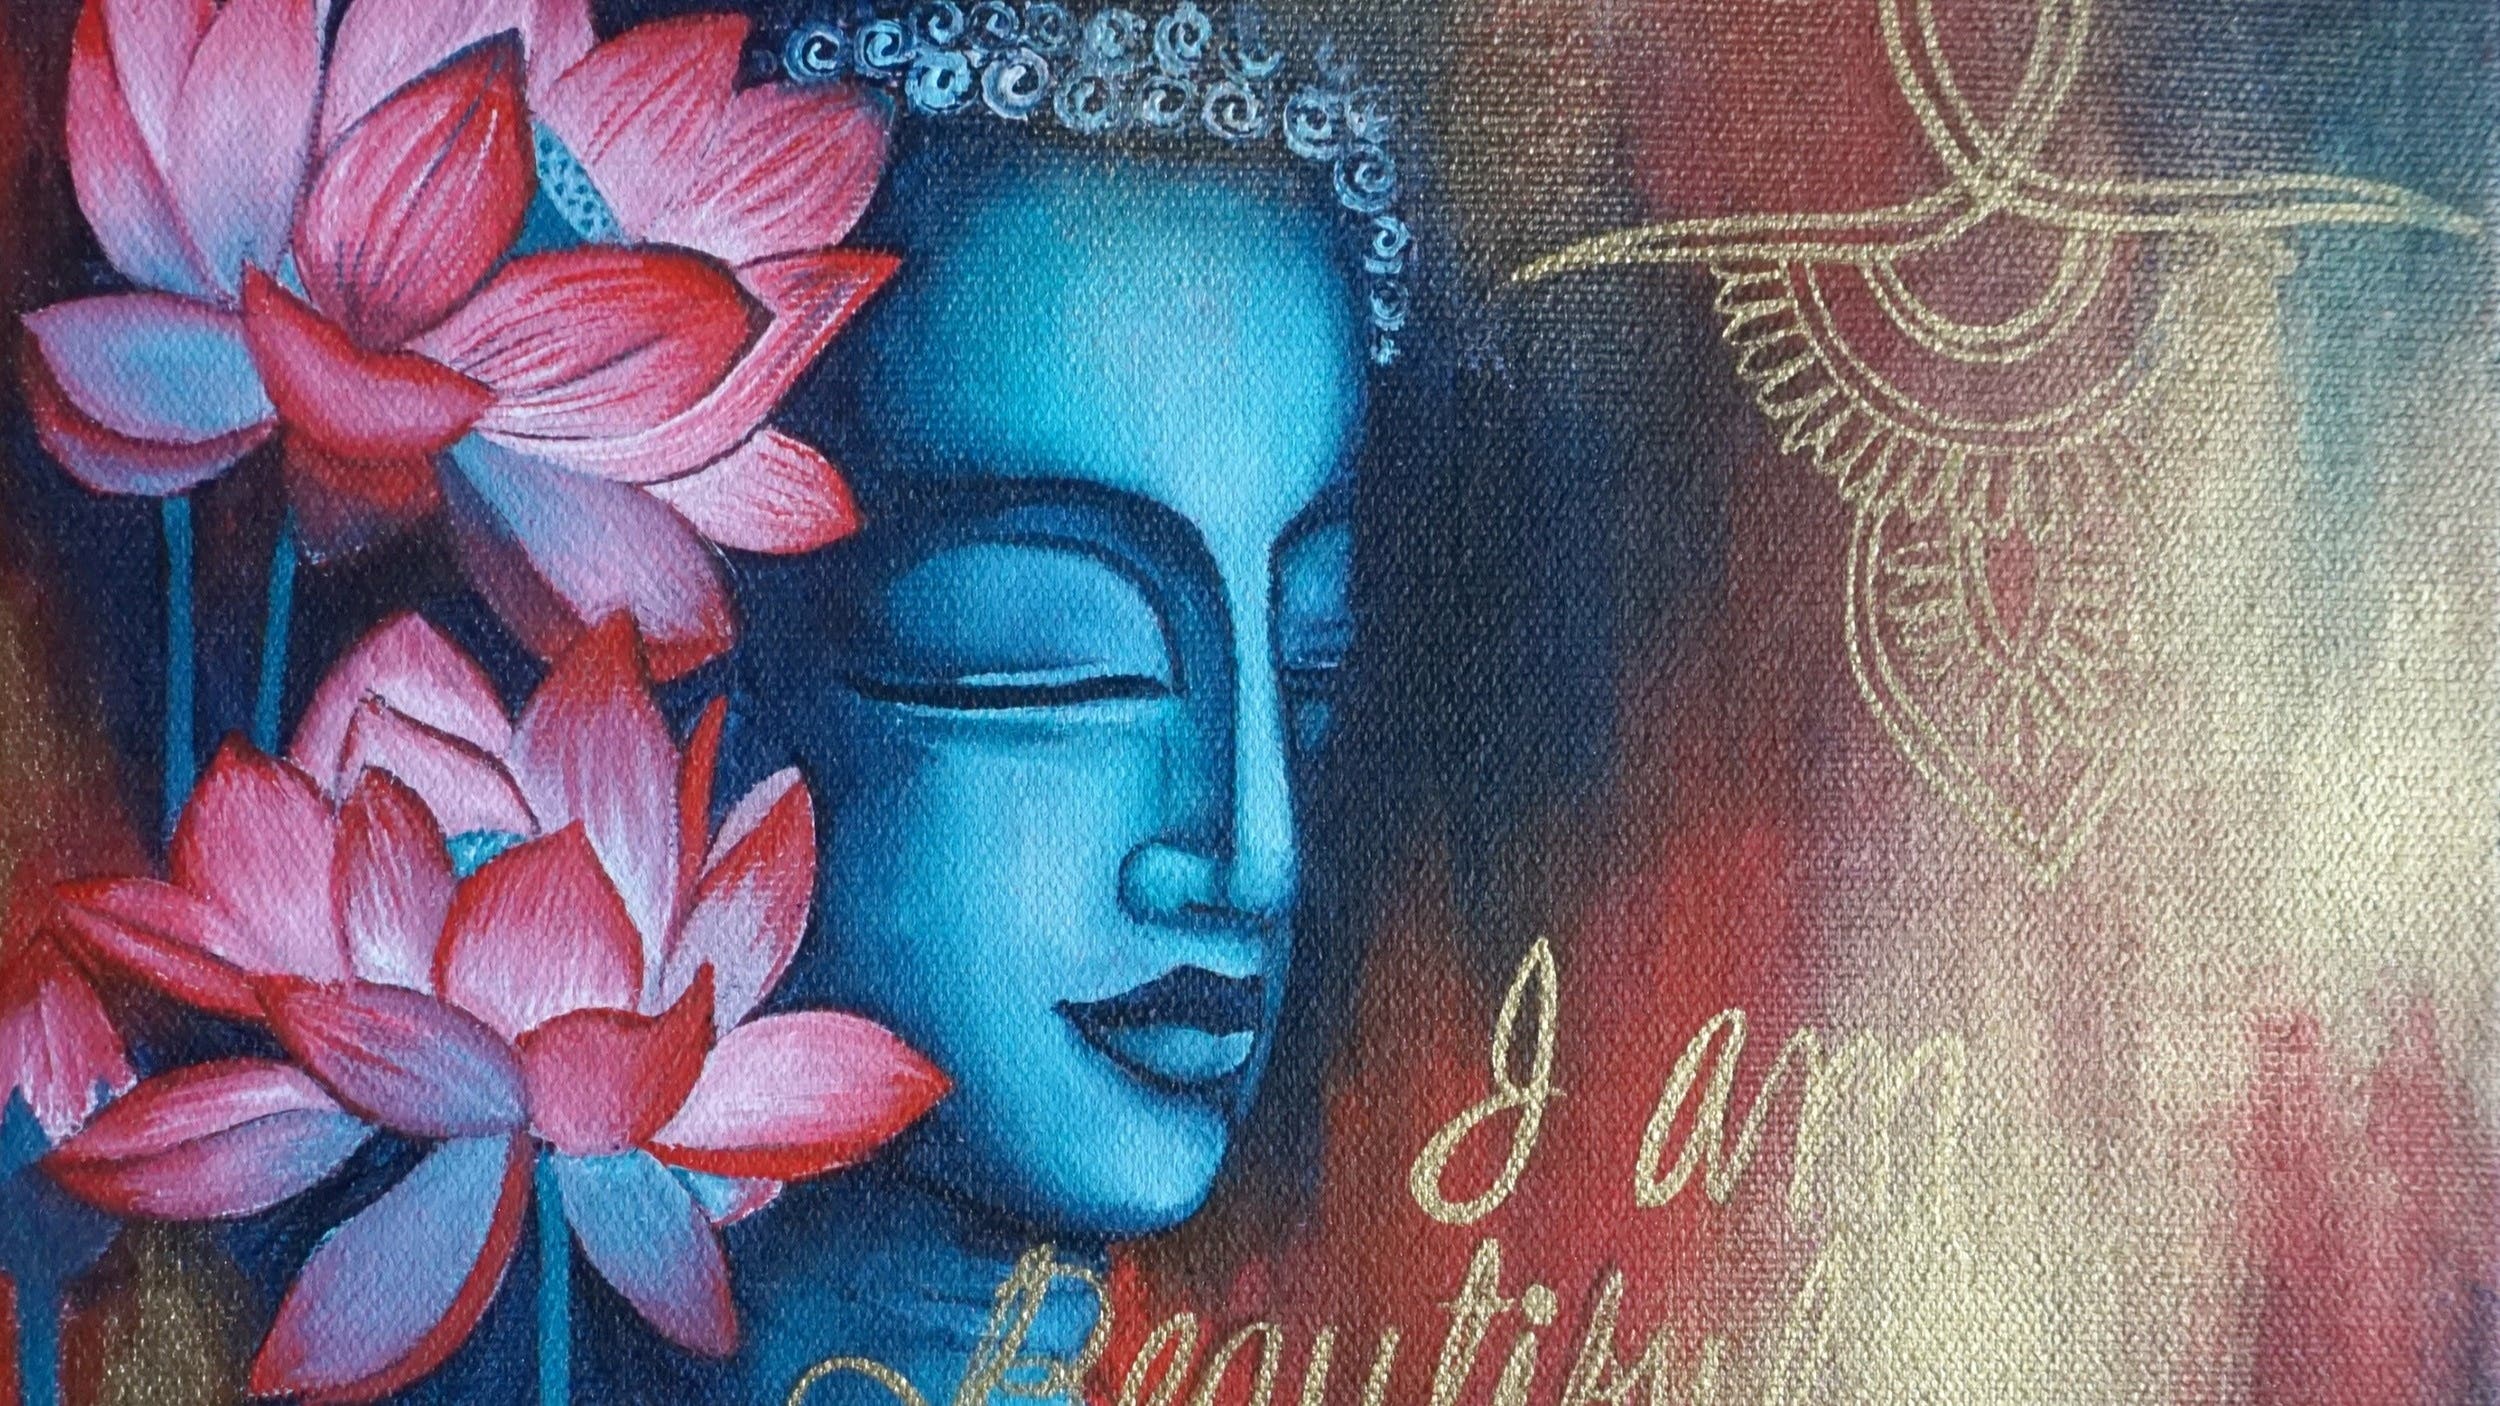 Explore Mindfulness and Creativity with Our Acrylic Painting Workshop: Learn How to Paint Buddha in Red and Gold Inspired by Affirmations - I AM, I AM, I AM